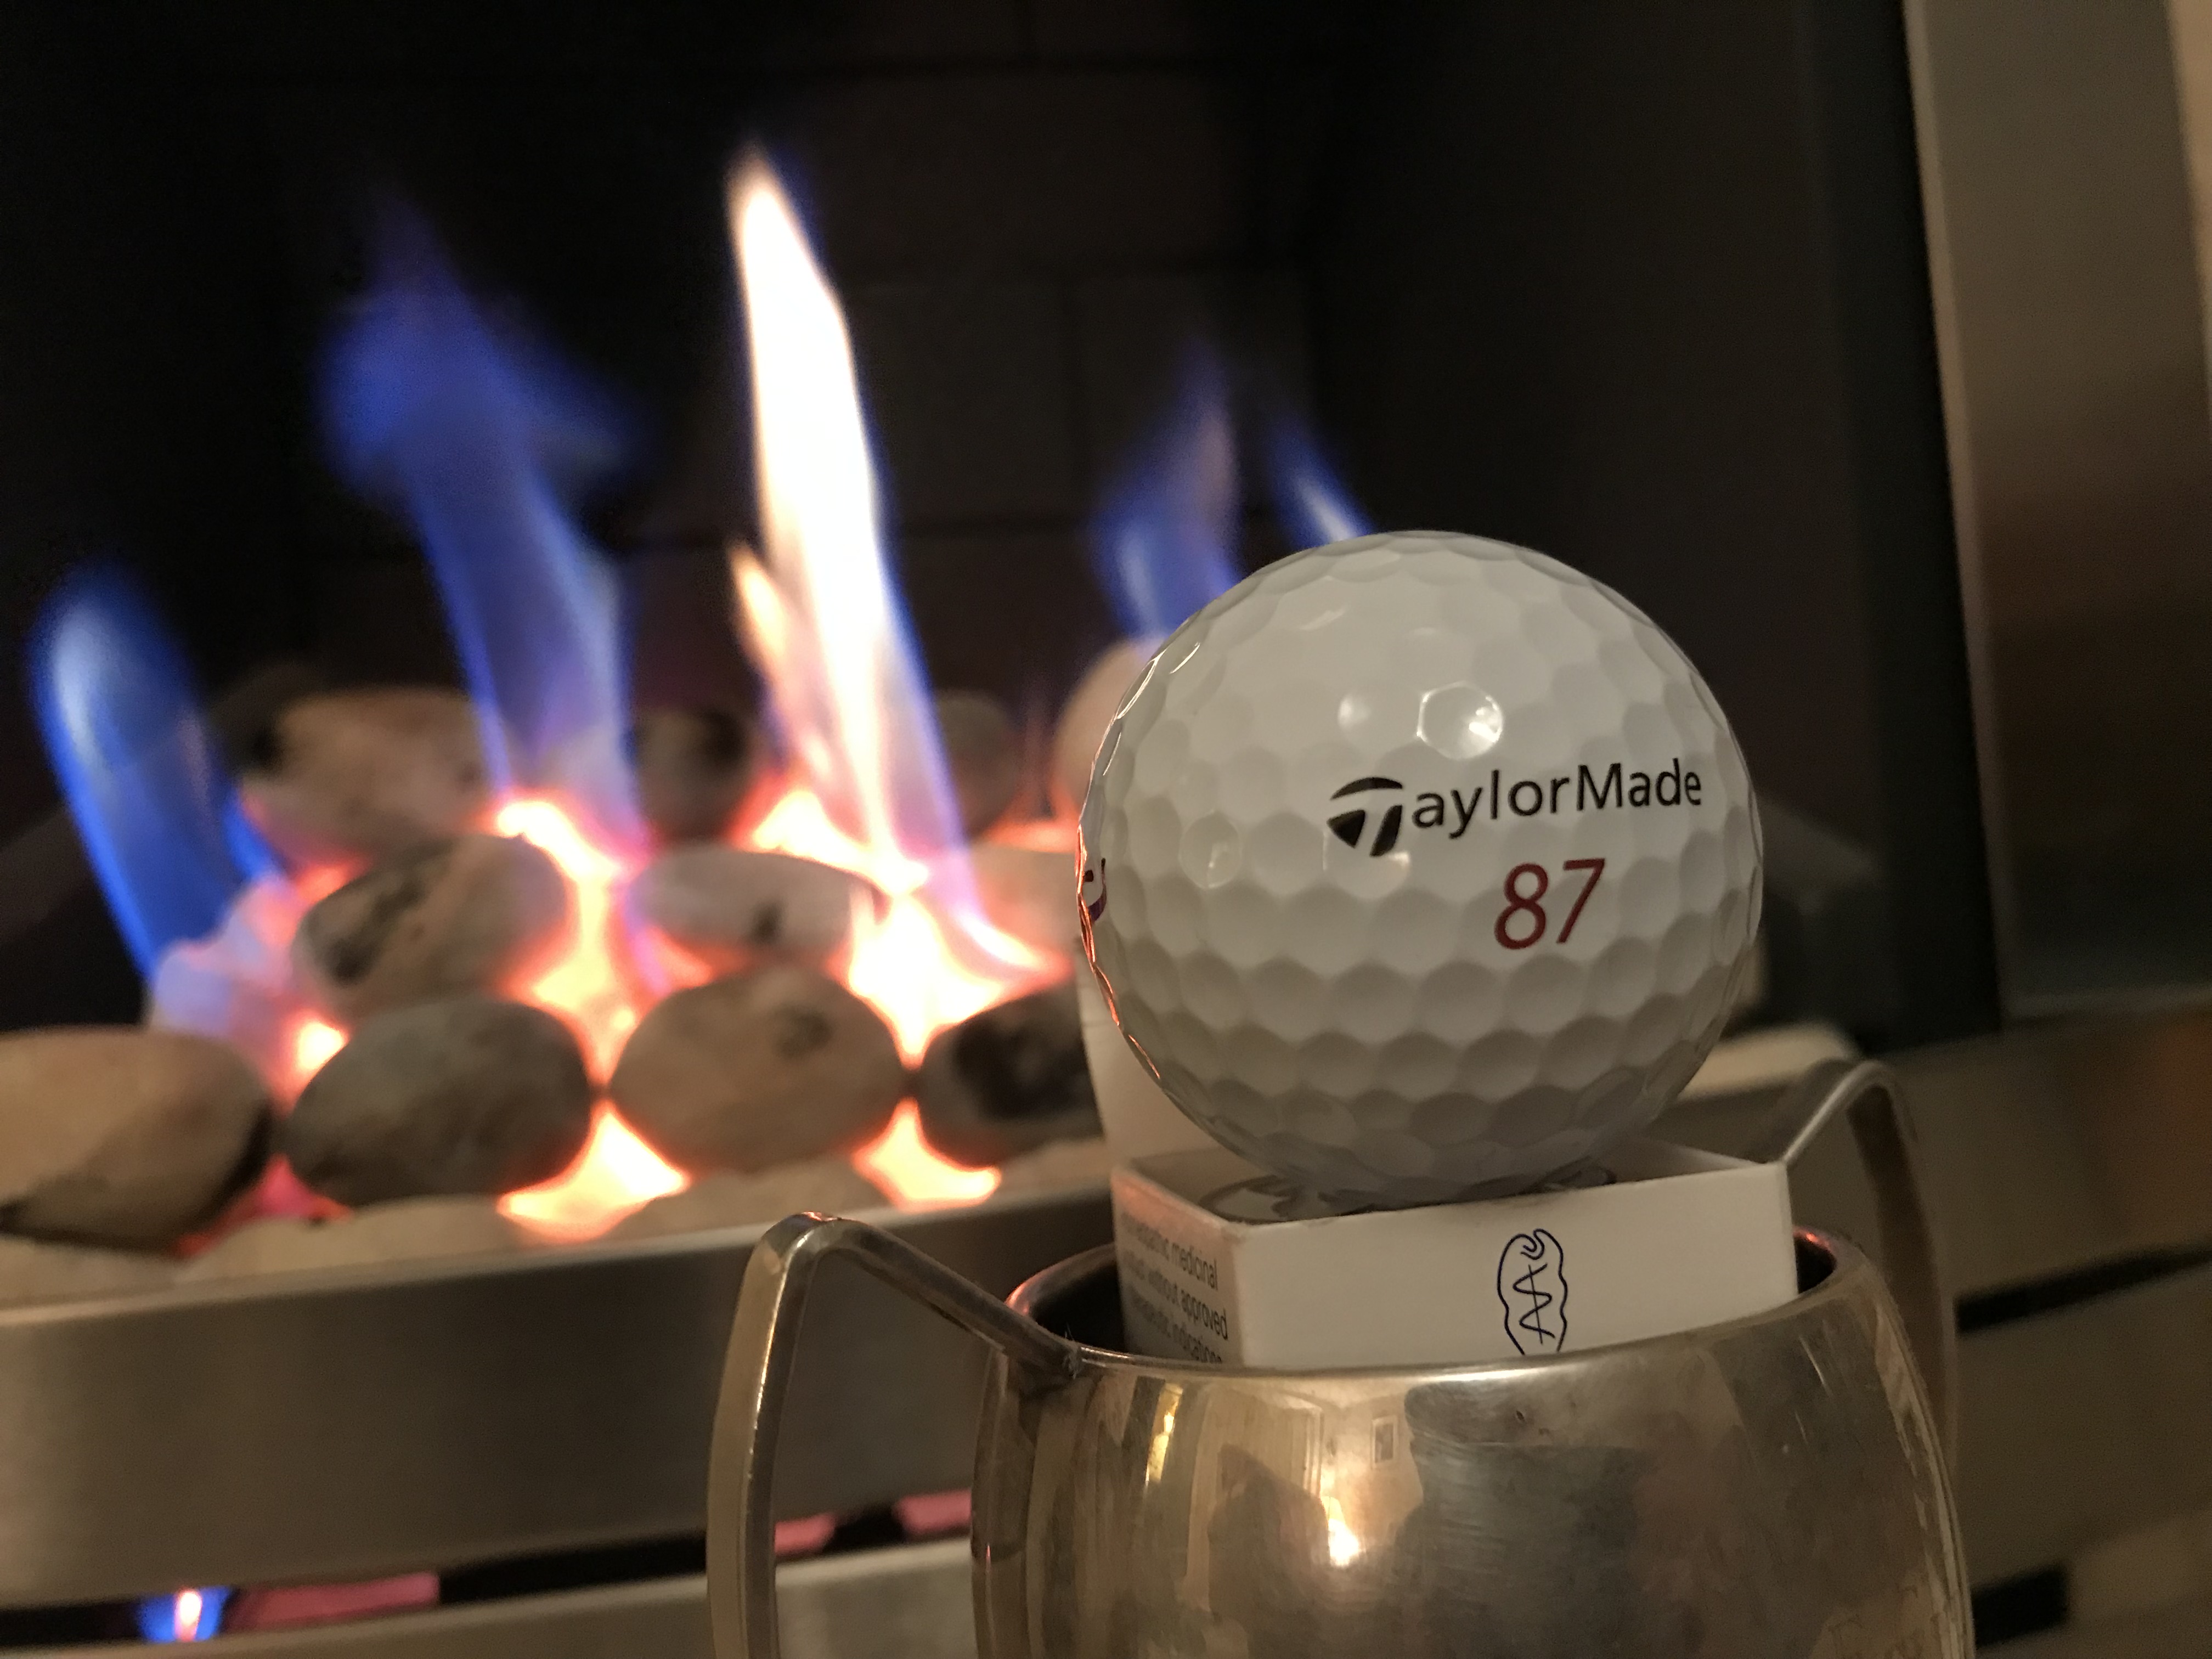 Golf ball experiment: HOT vs COLD golf balls with TaylorMade's TP5x...